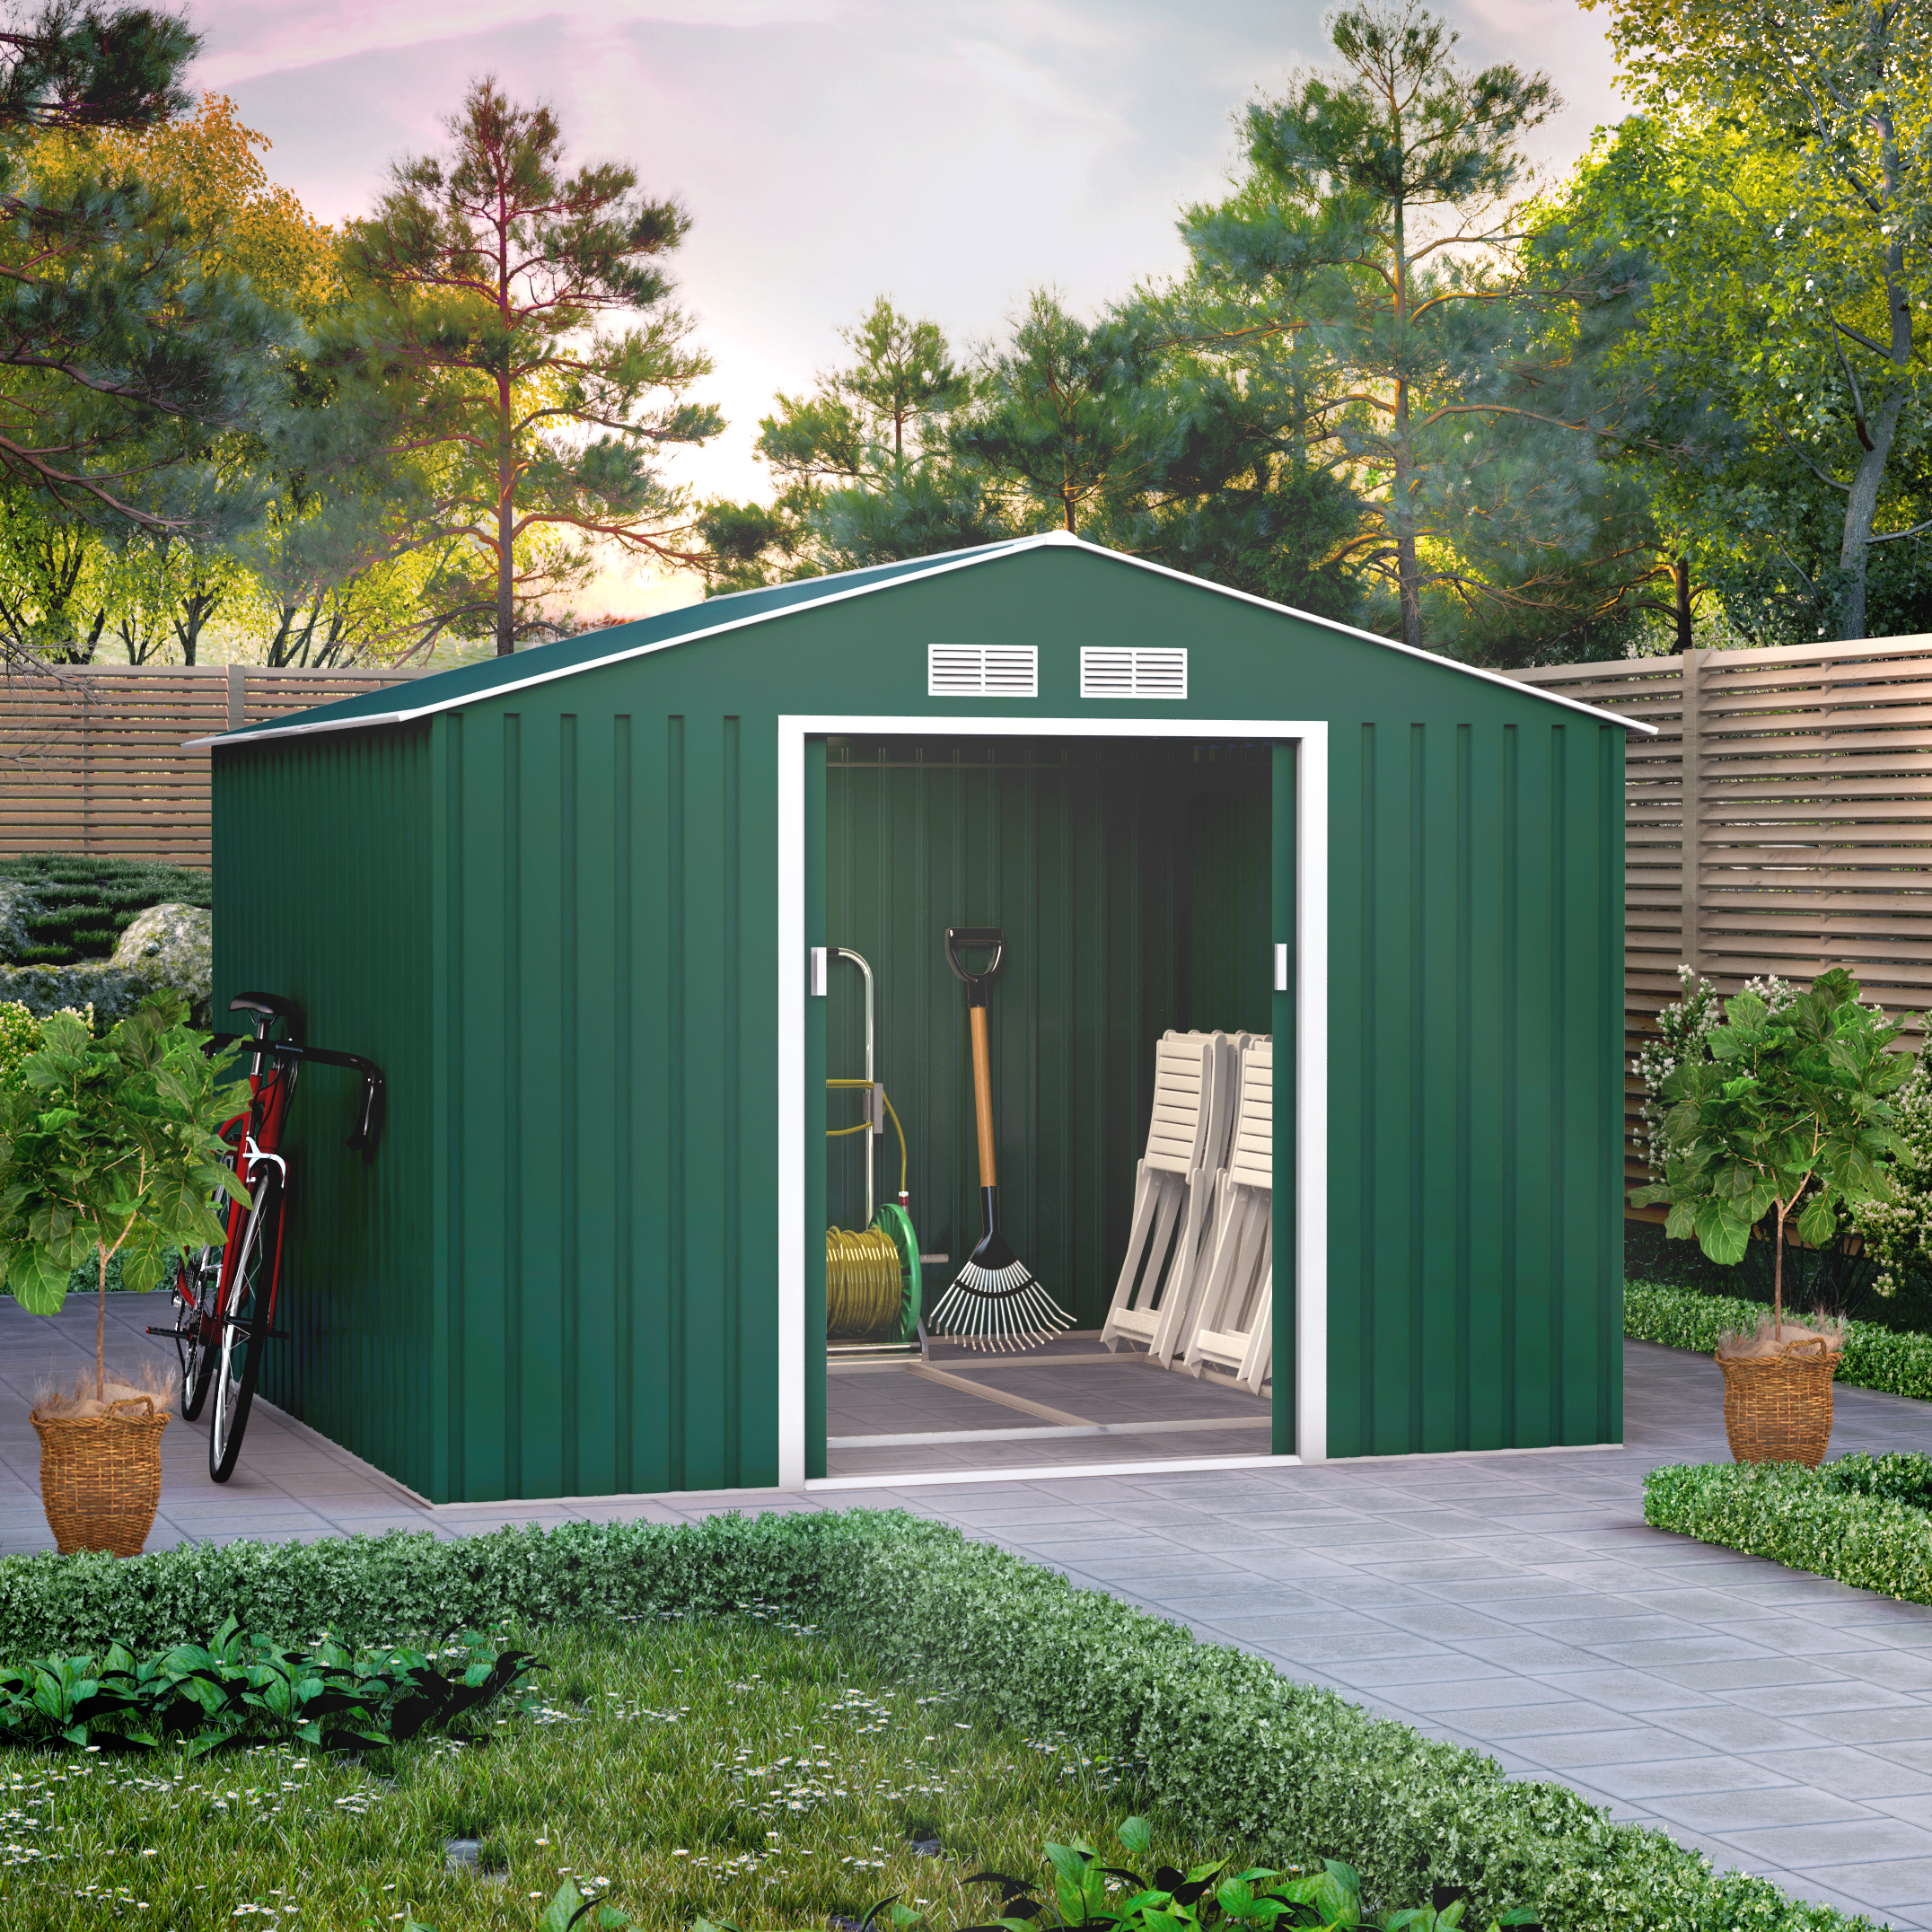 9x8 Ranger Apex Metal Shed With Foundation Kit - Dark Green BillyOh